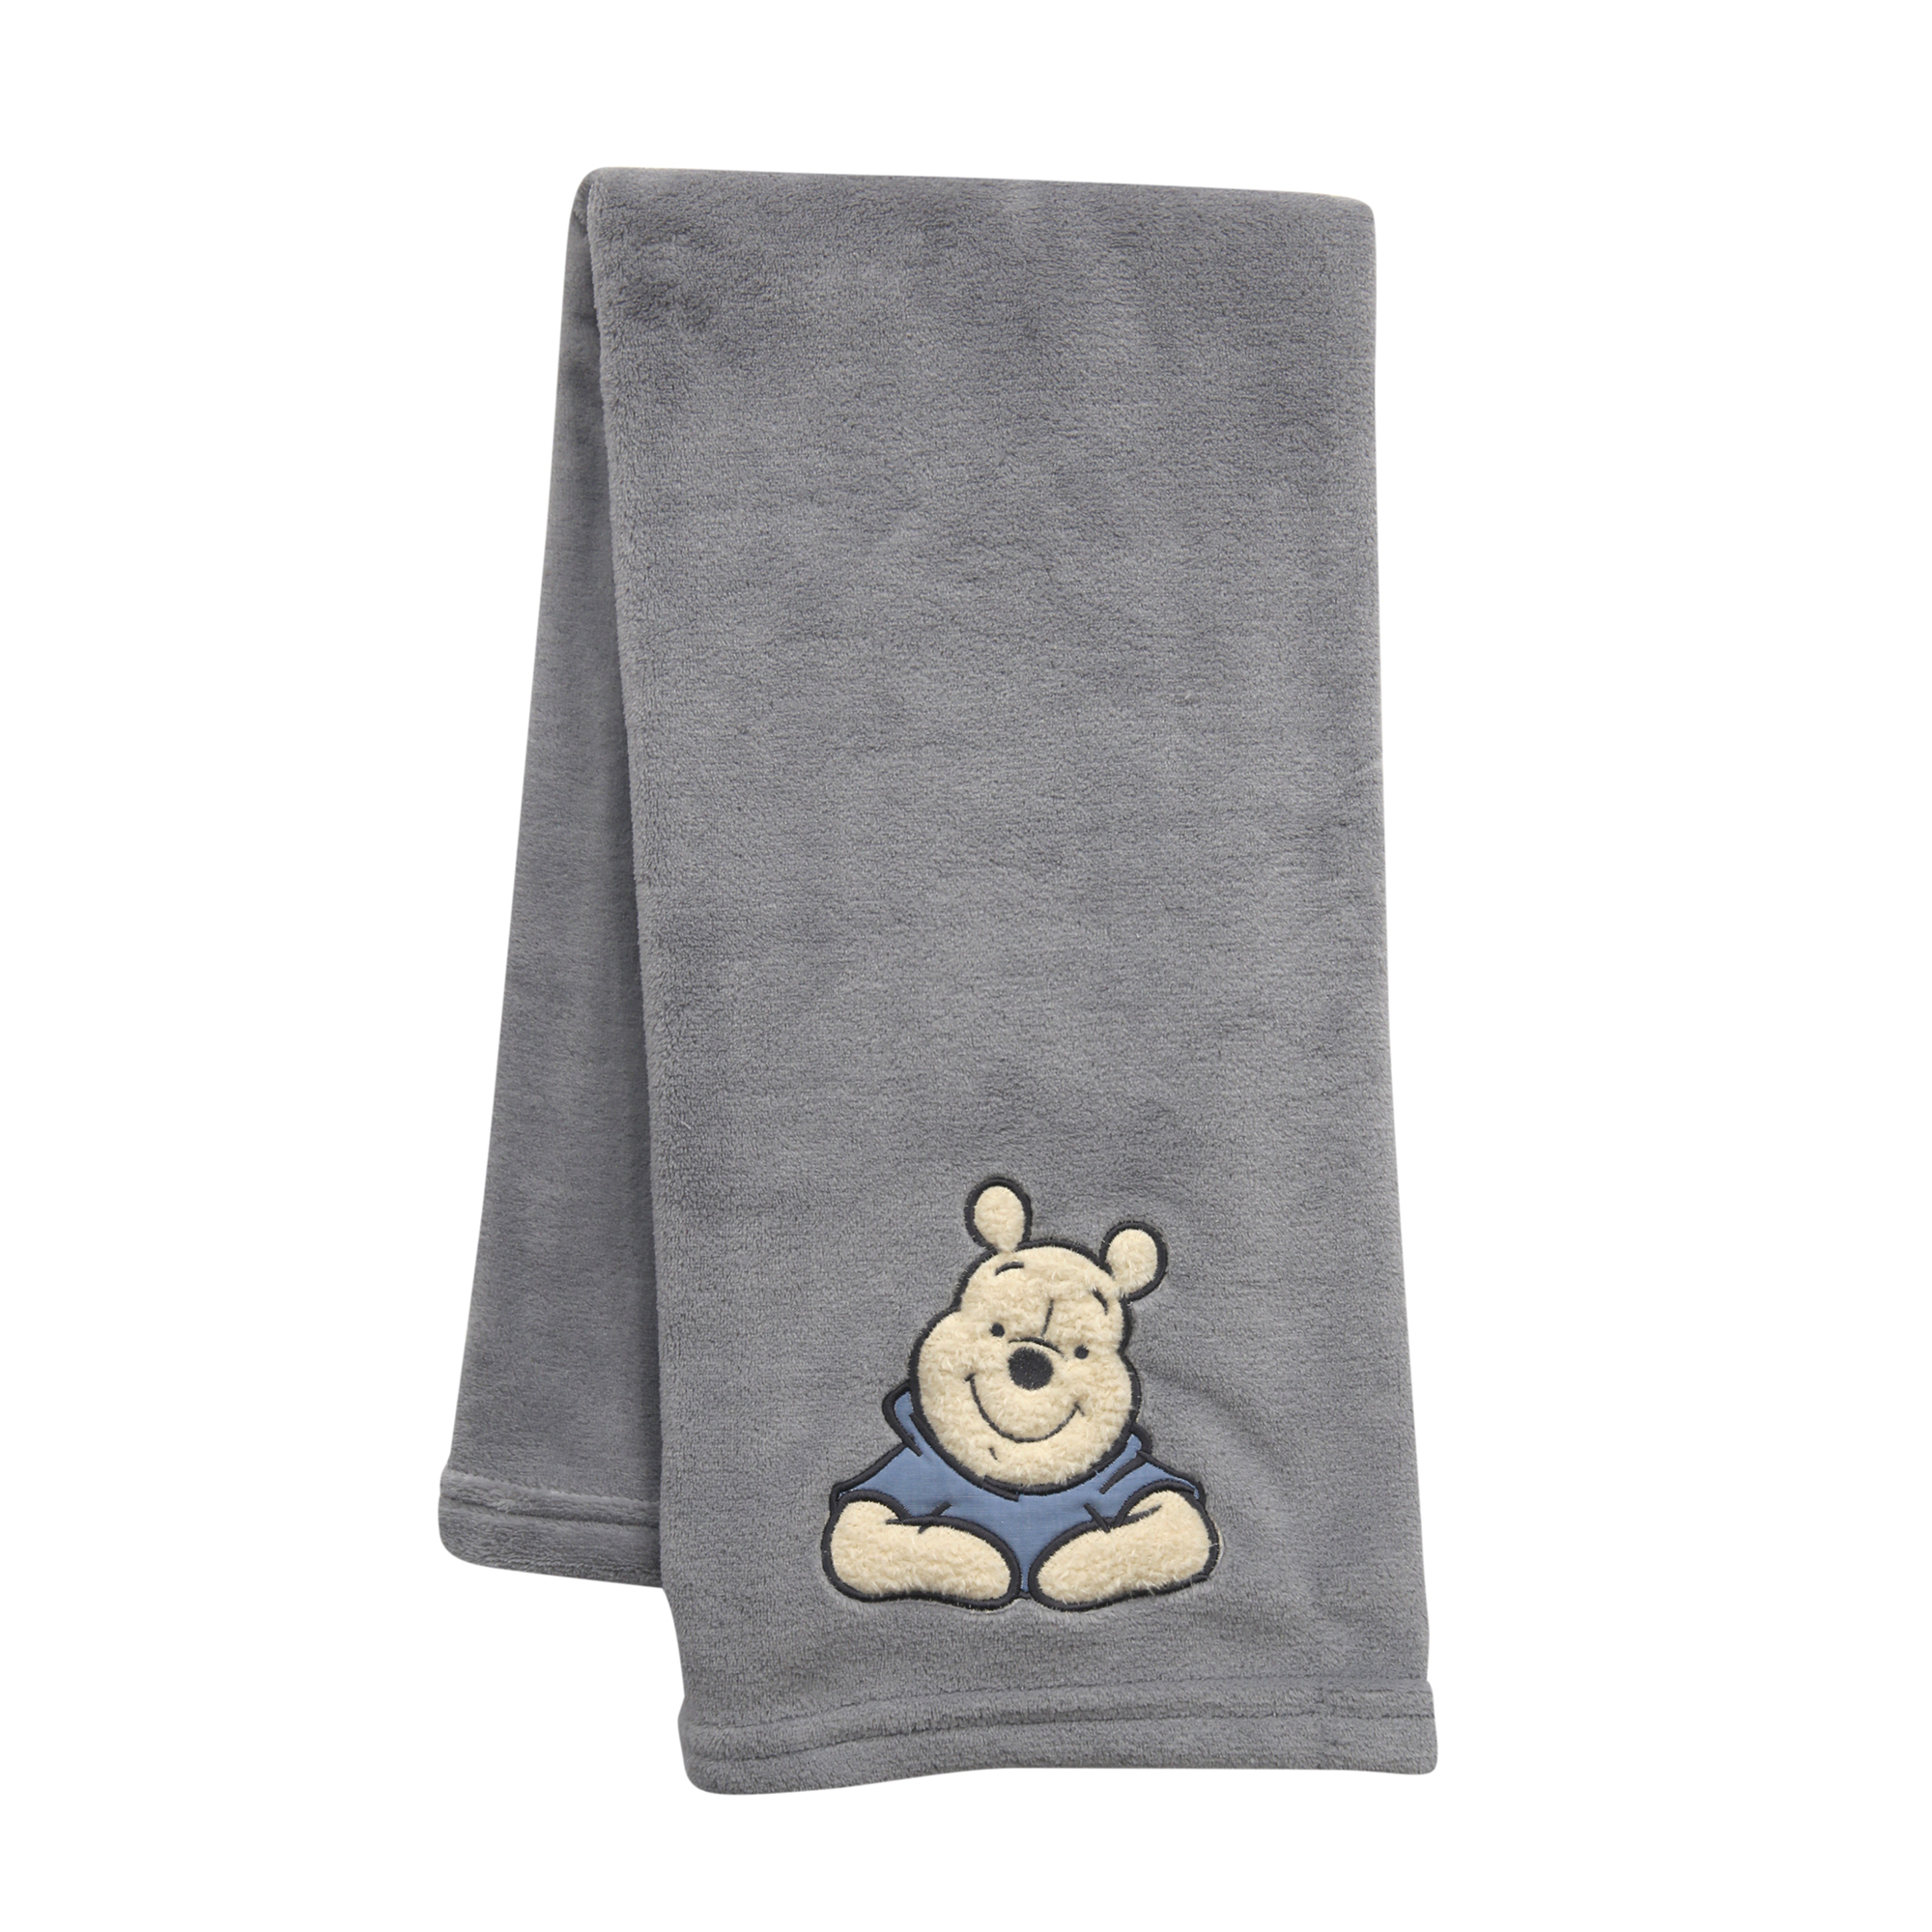 Lambs & Ivy Forever Pooh Baby Blanket - image 1 of 5